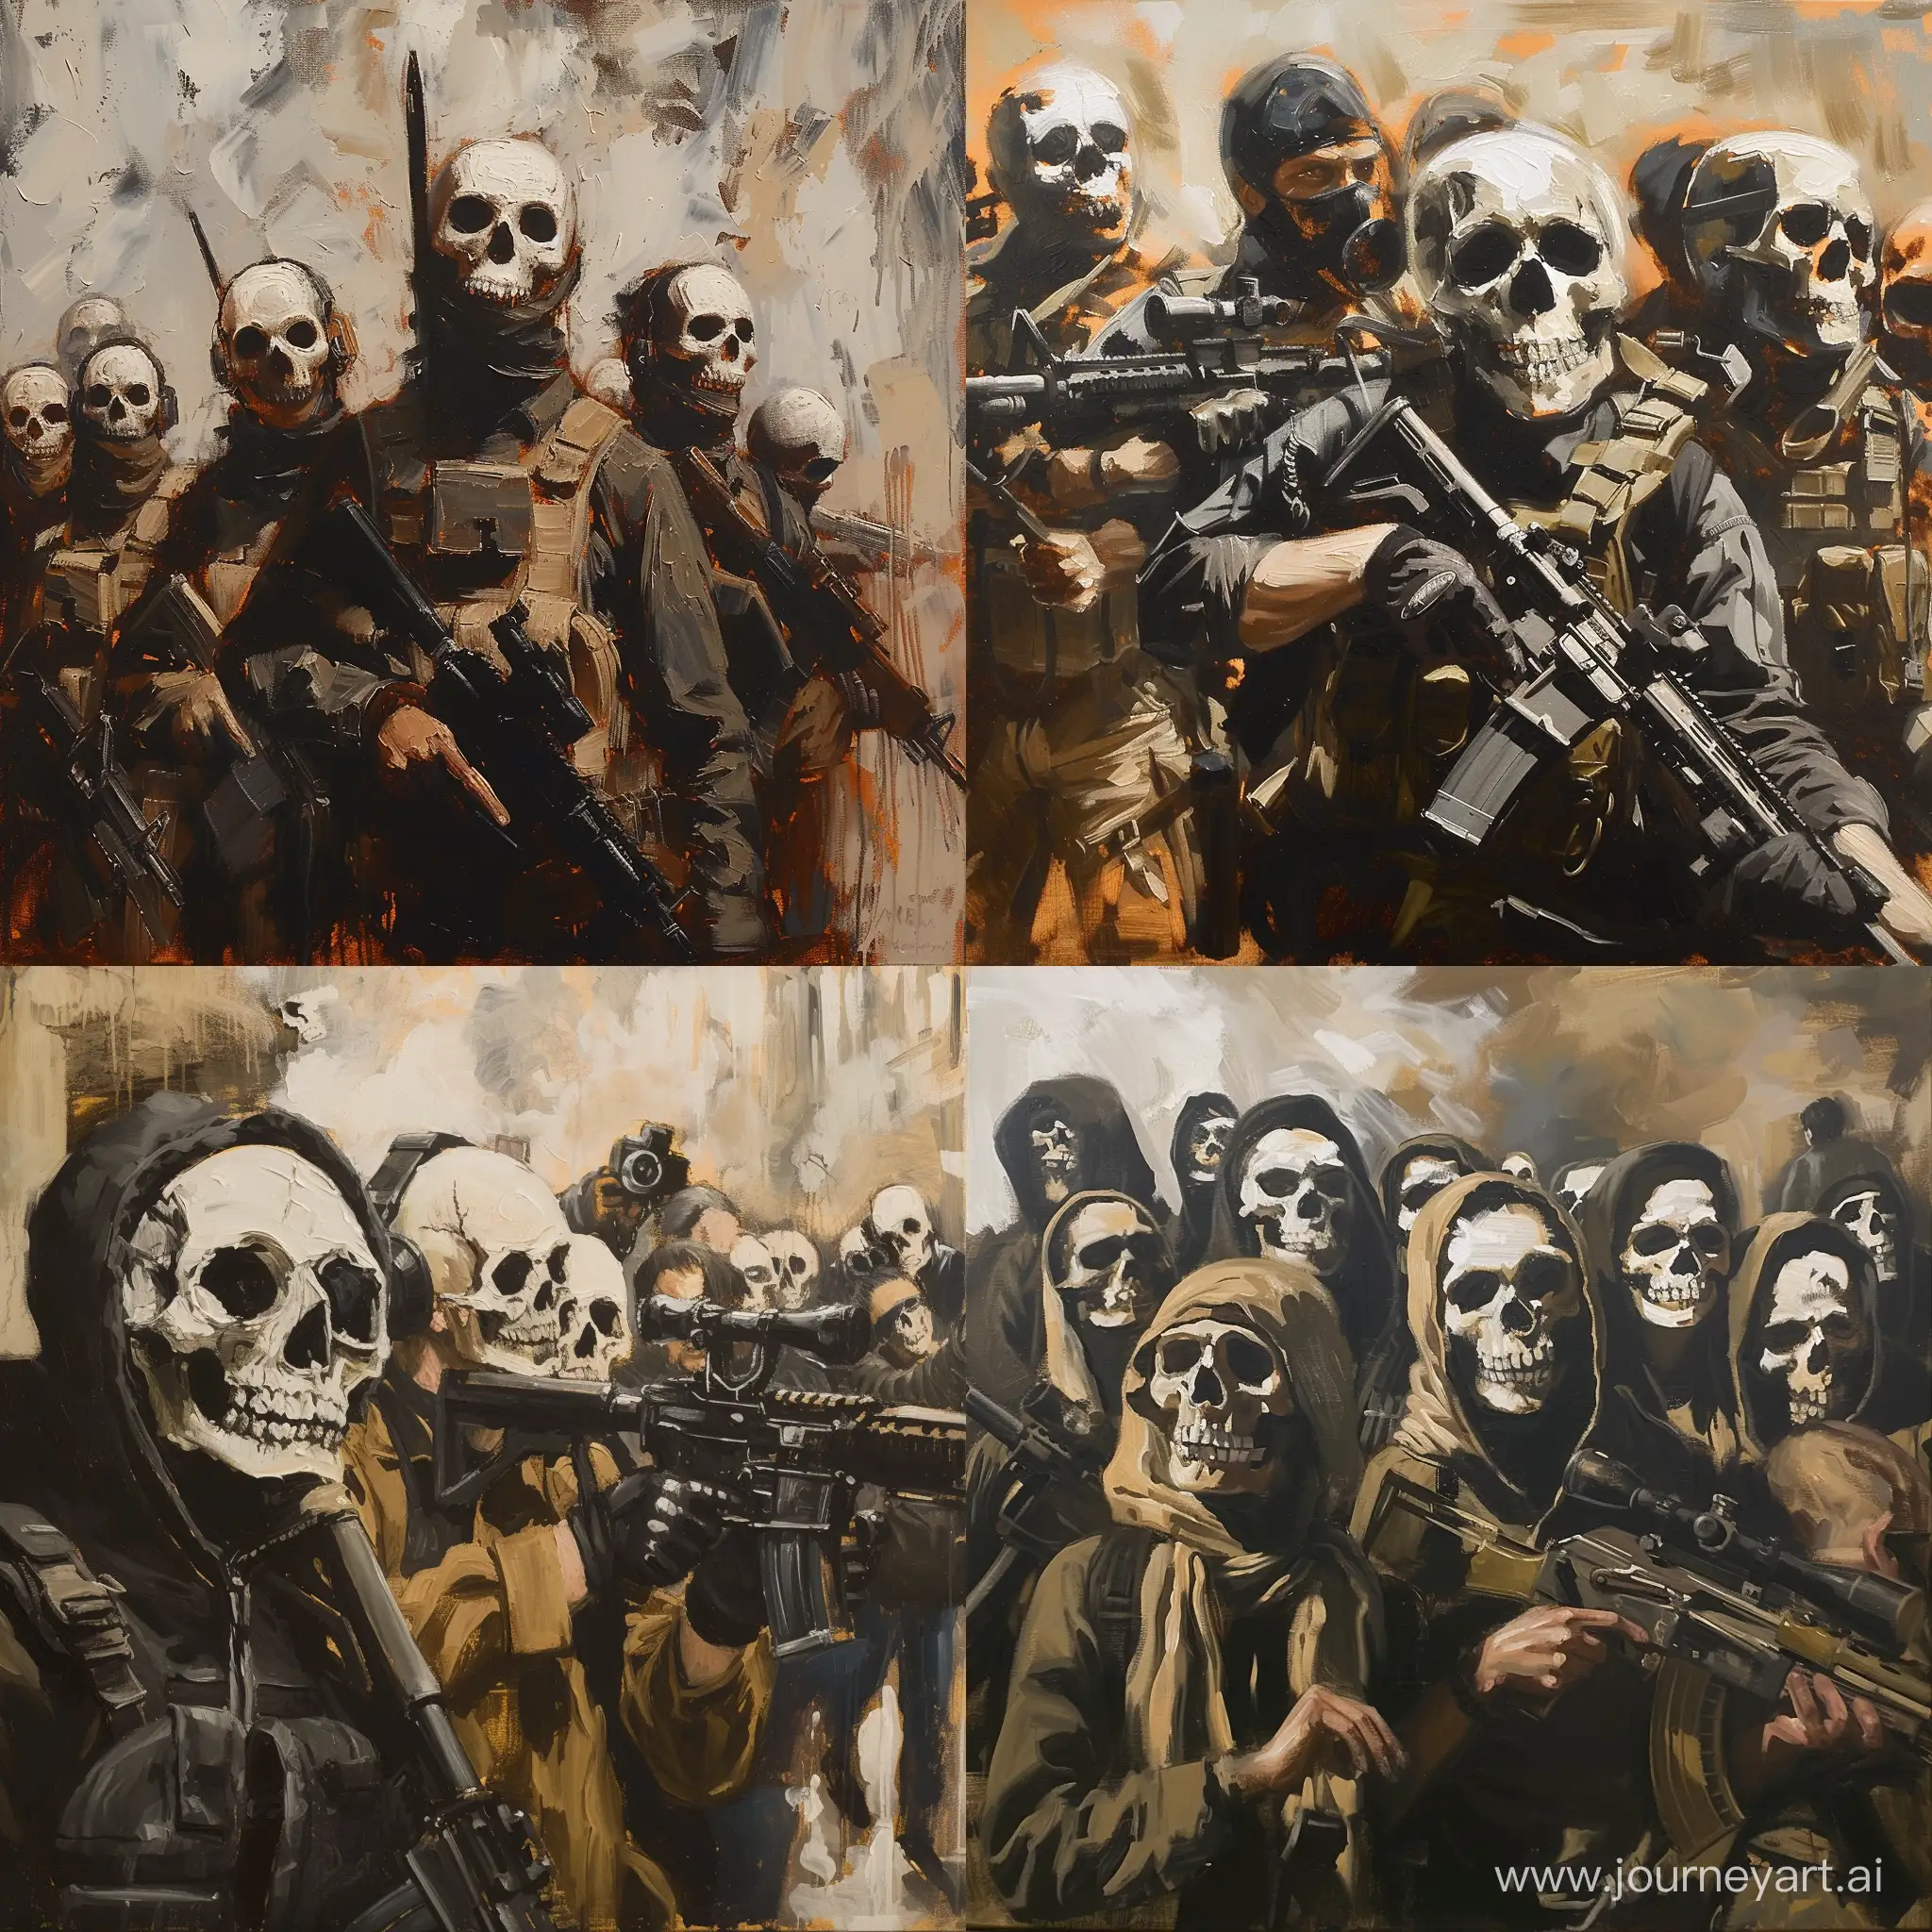 Covert-Military-Operation-Skull-Masked-Soldiers-in-Oil-Painting-Ambush